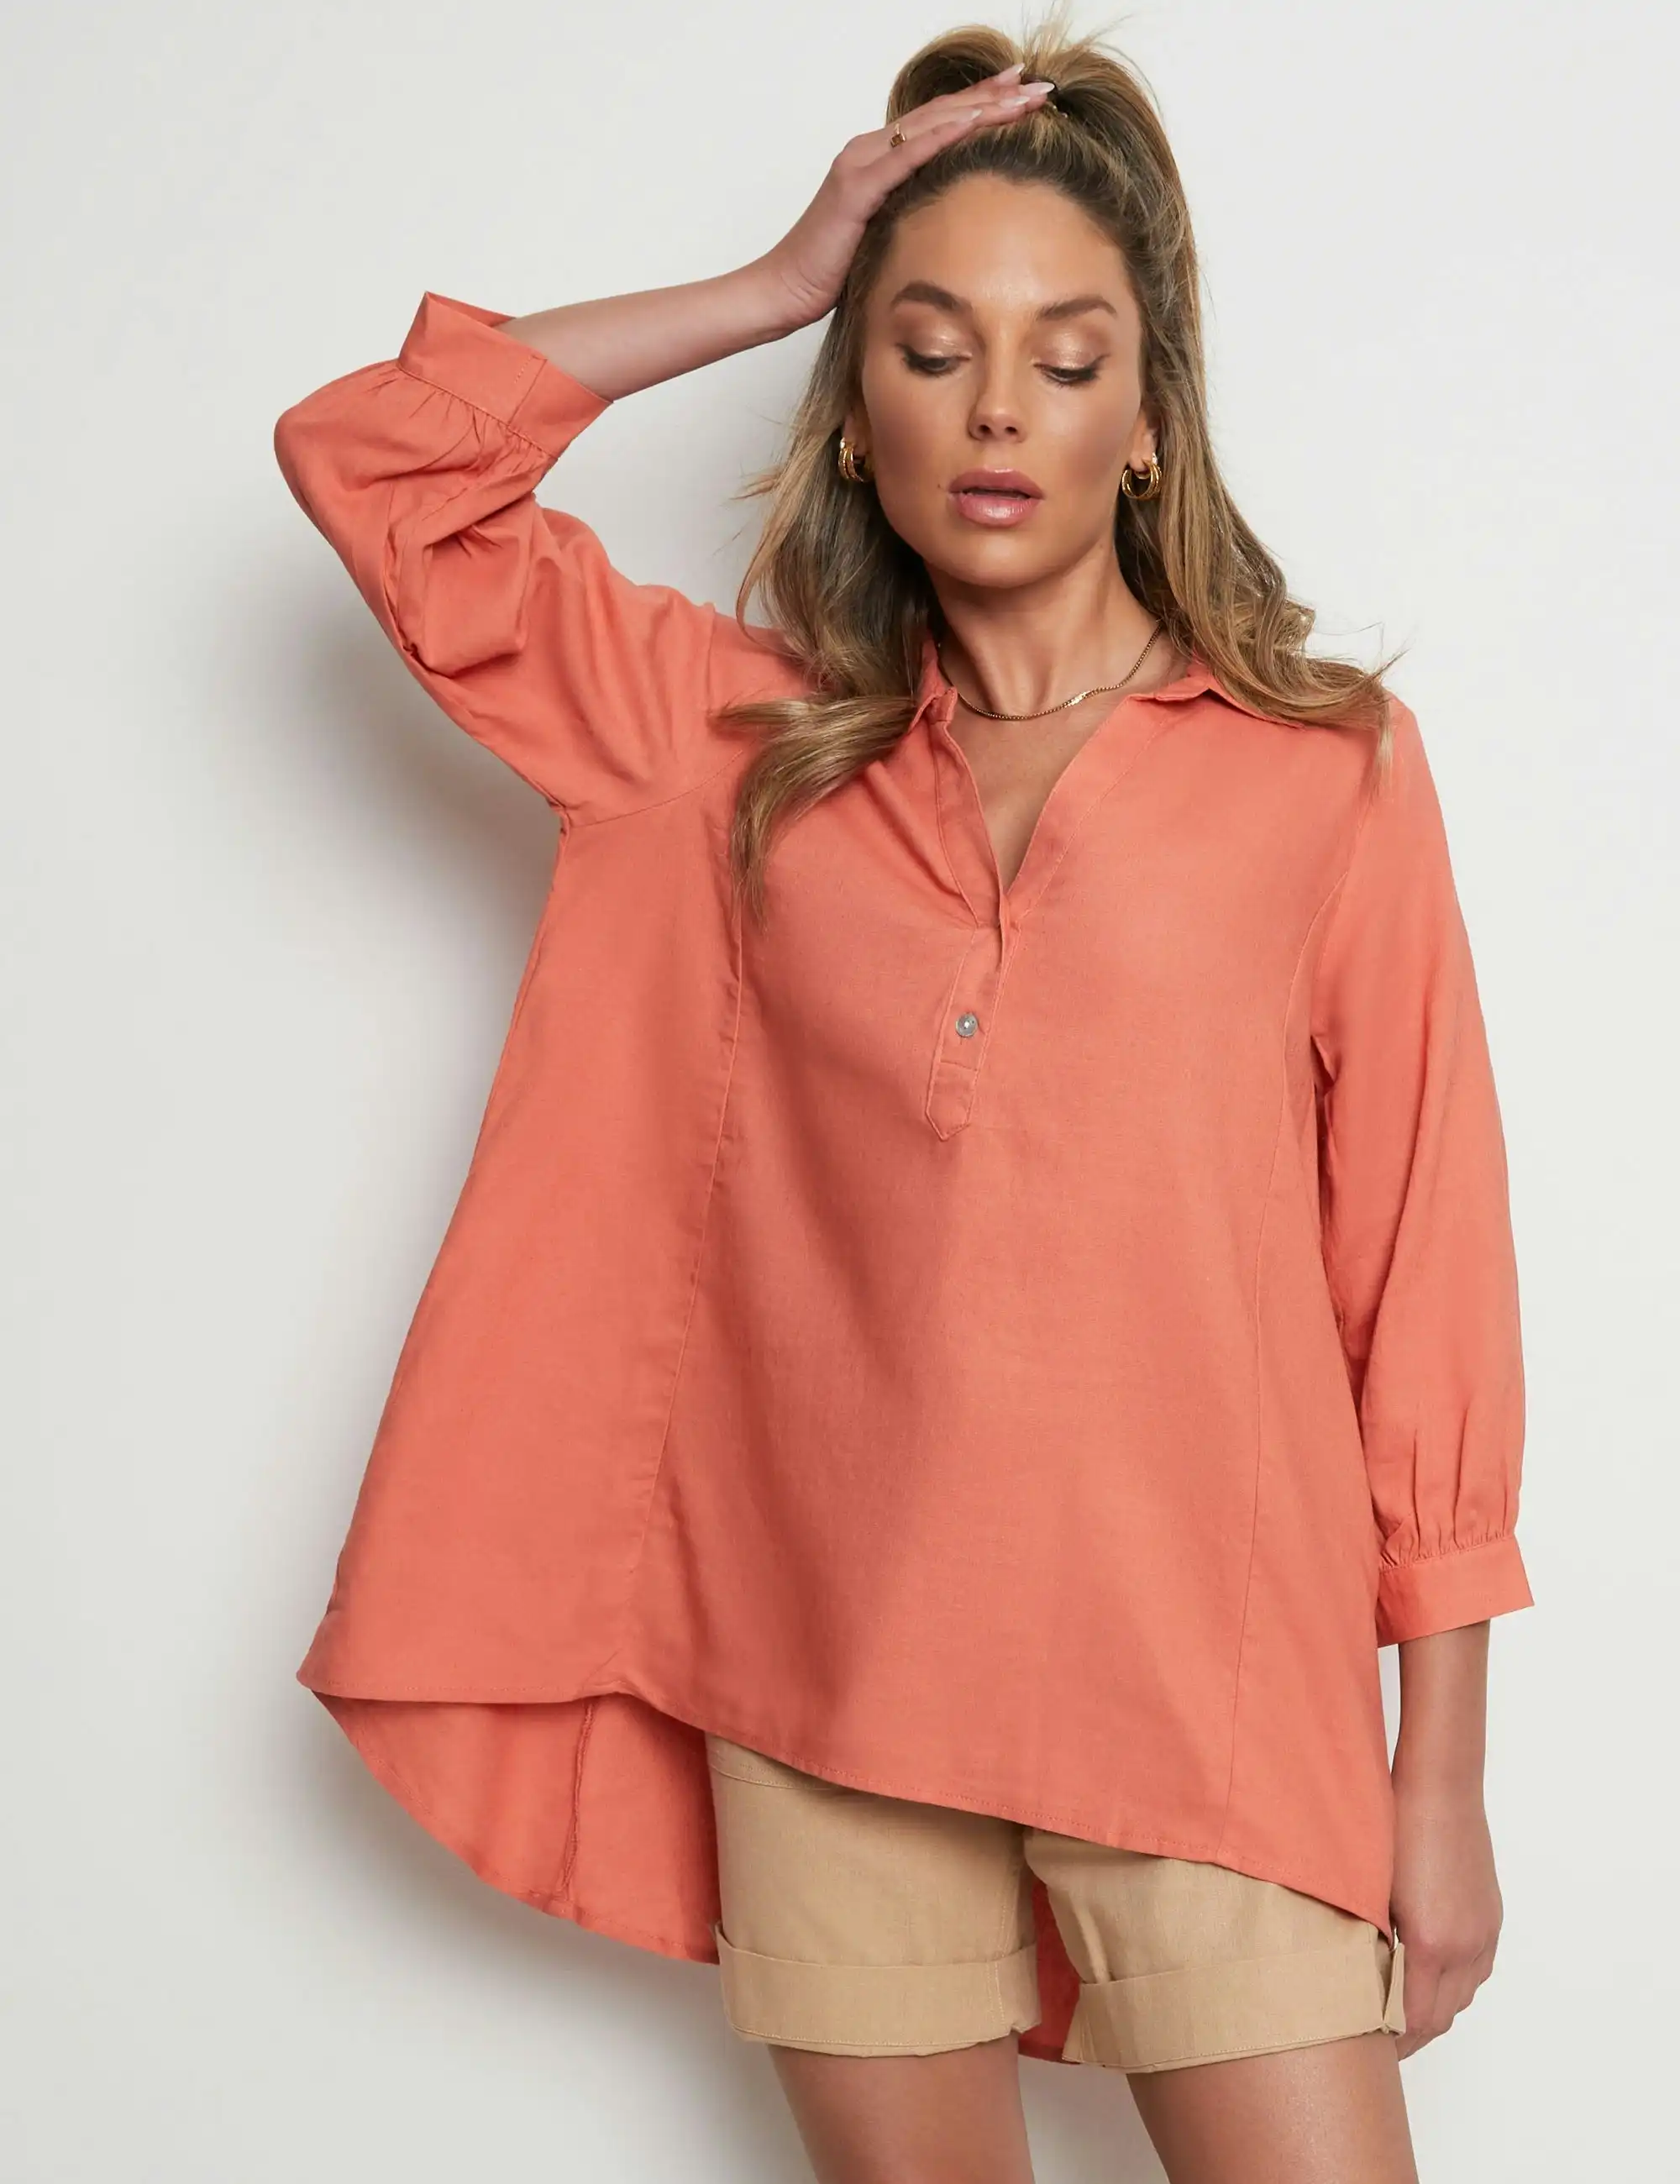 Rockmans 3/4 Sleeve Woven Swing High Low Shirt (Apricot)